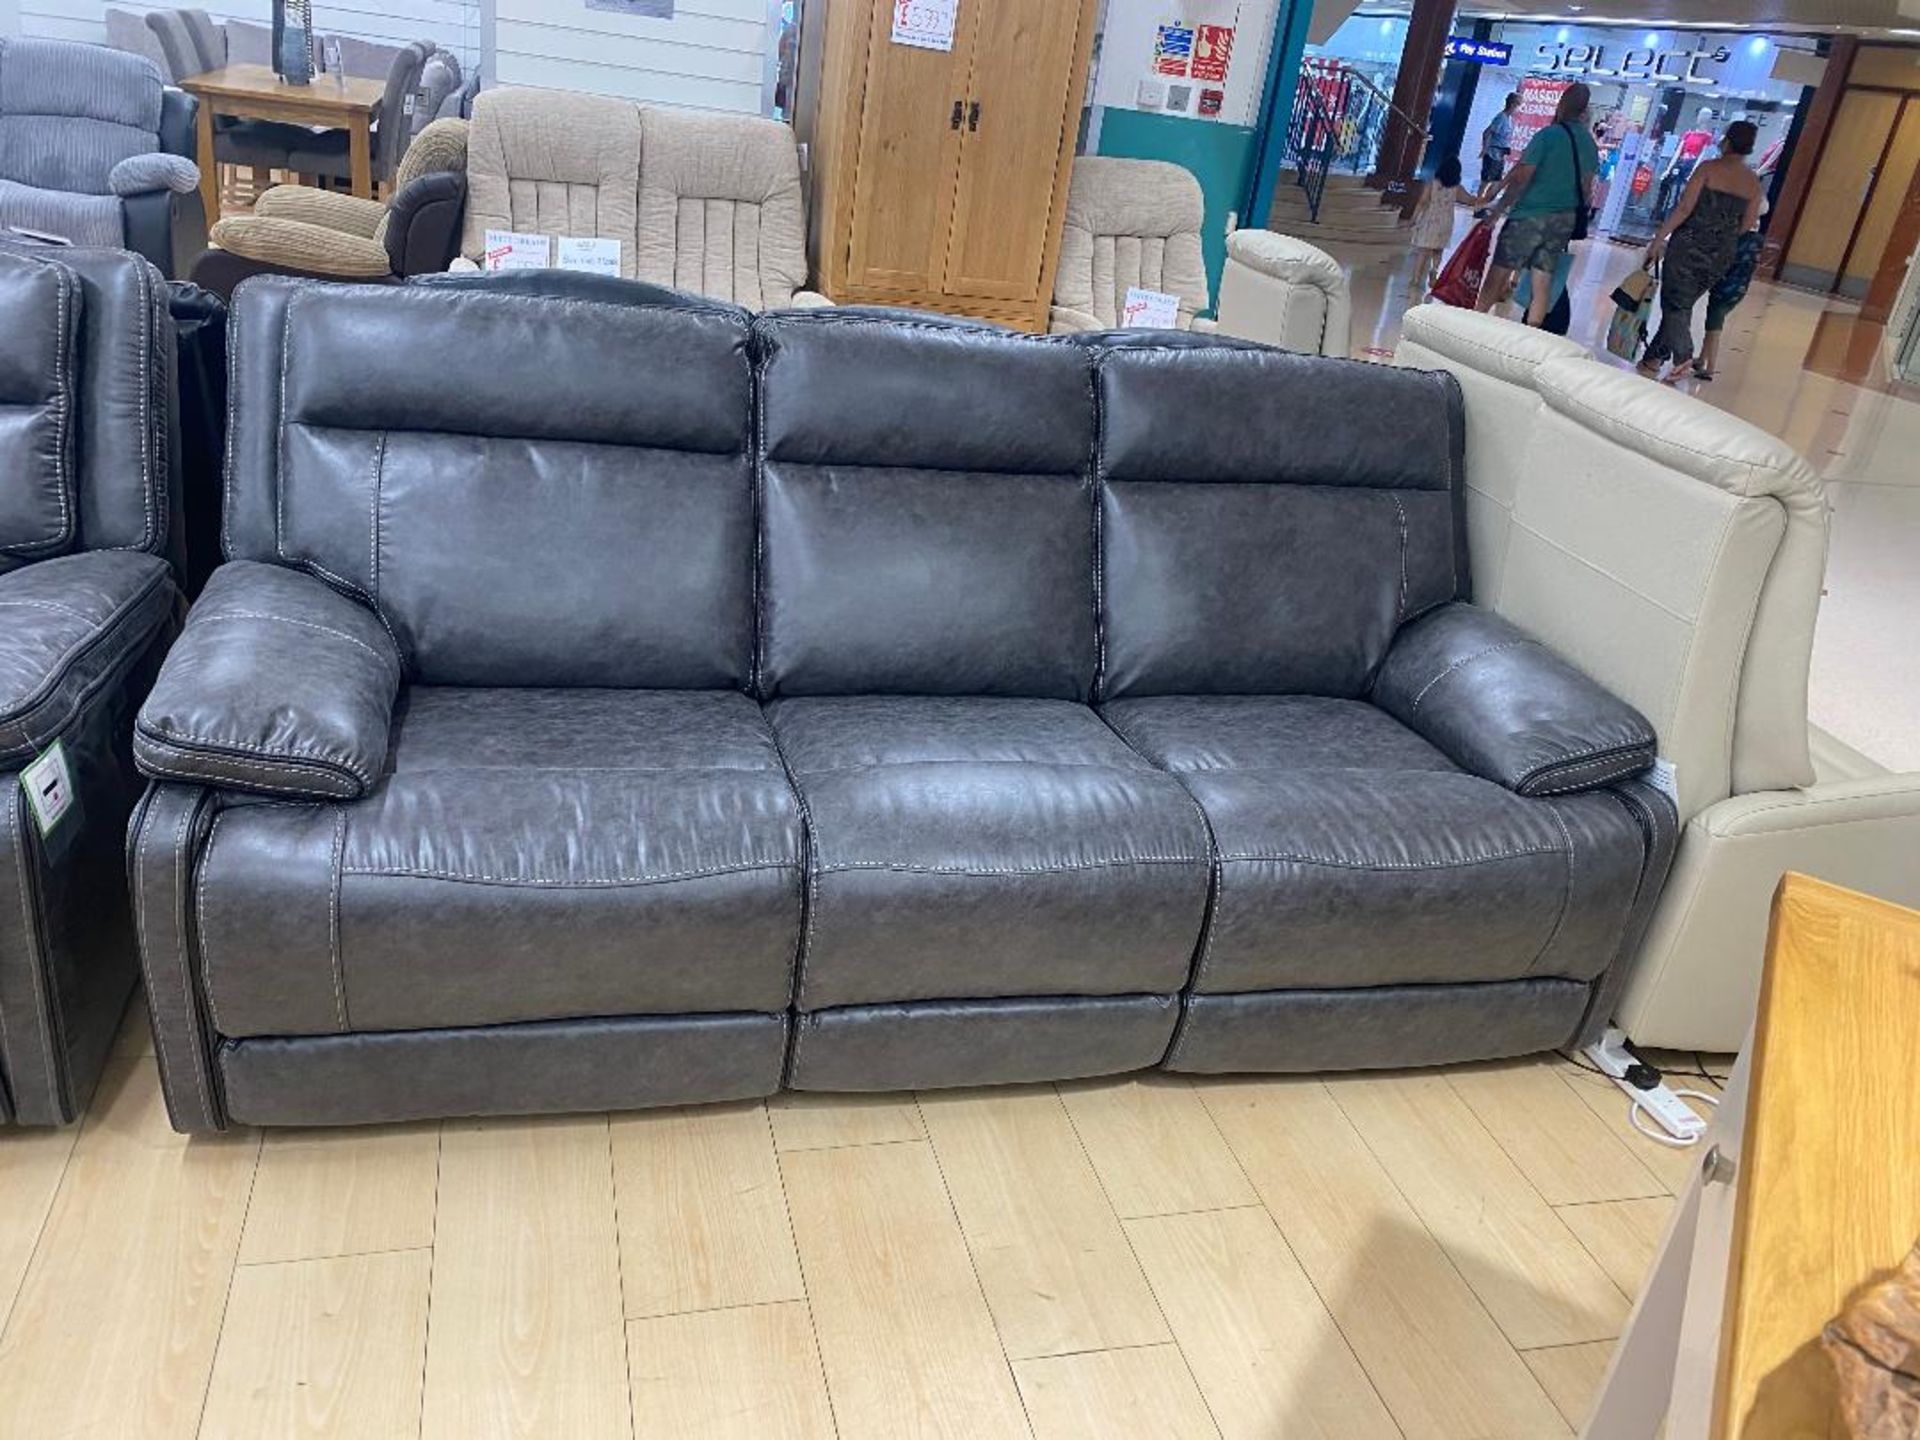 Brand new boxed 3 seater cheltenham electric reclining sofa in dark grey leather